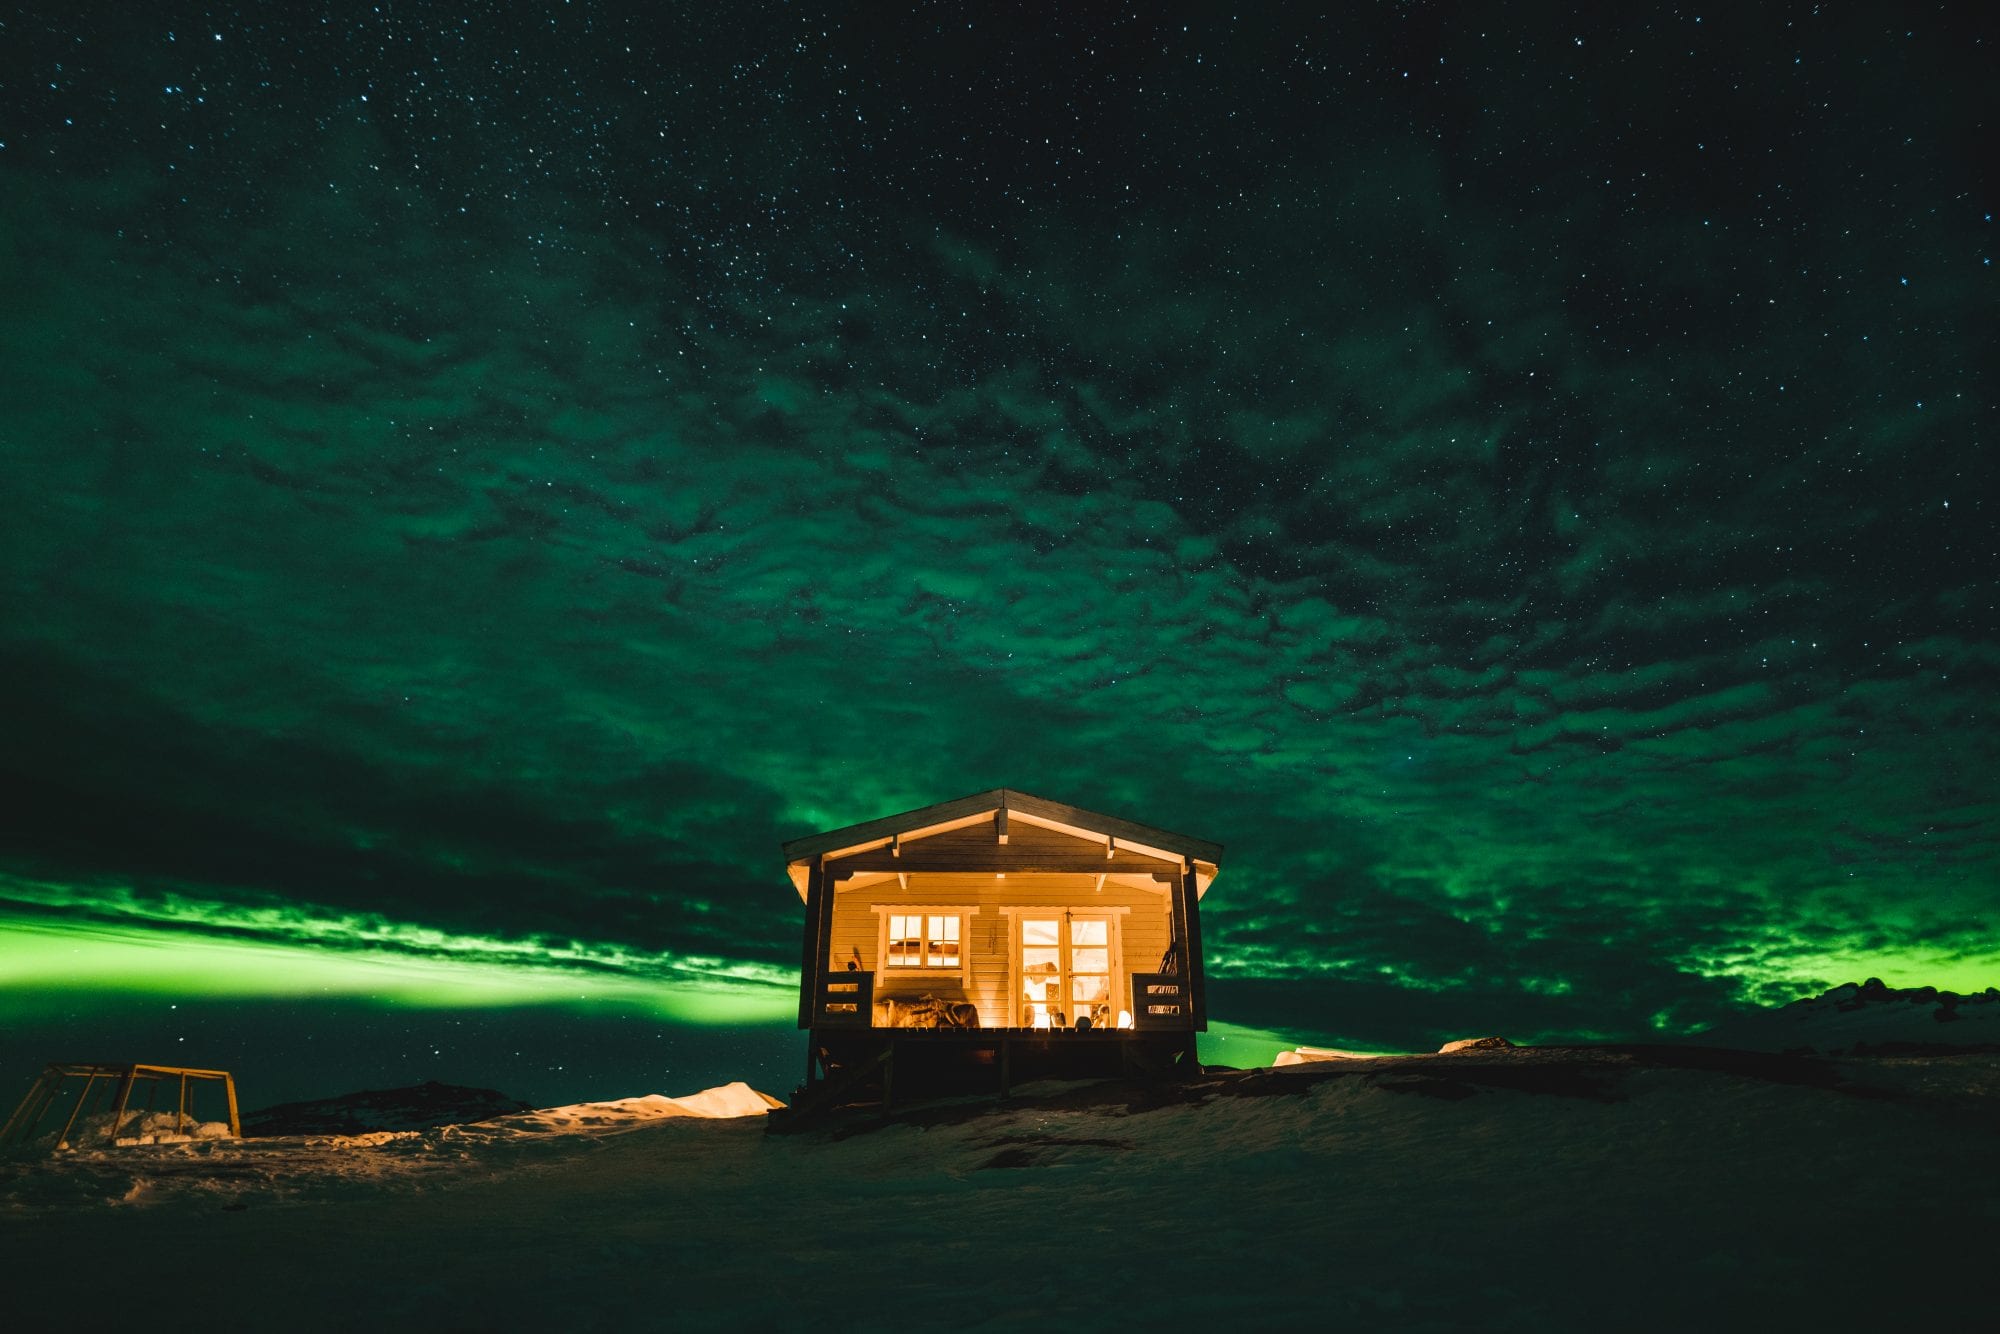 A cosy cabin in the wintery Icelandic landscape lit up inside and with Northern Lights shining overhead